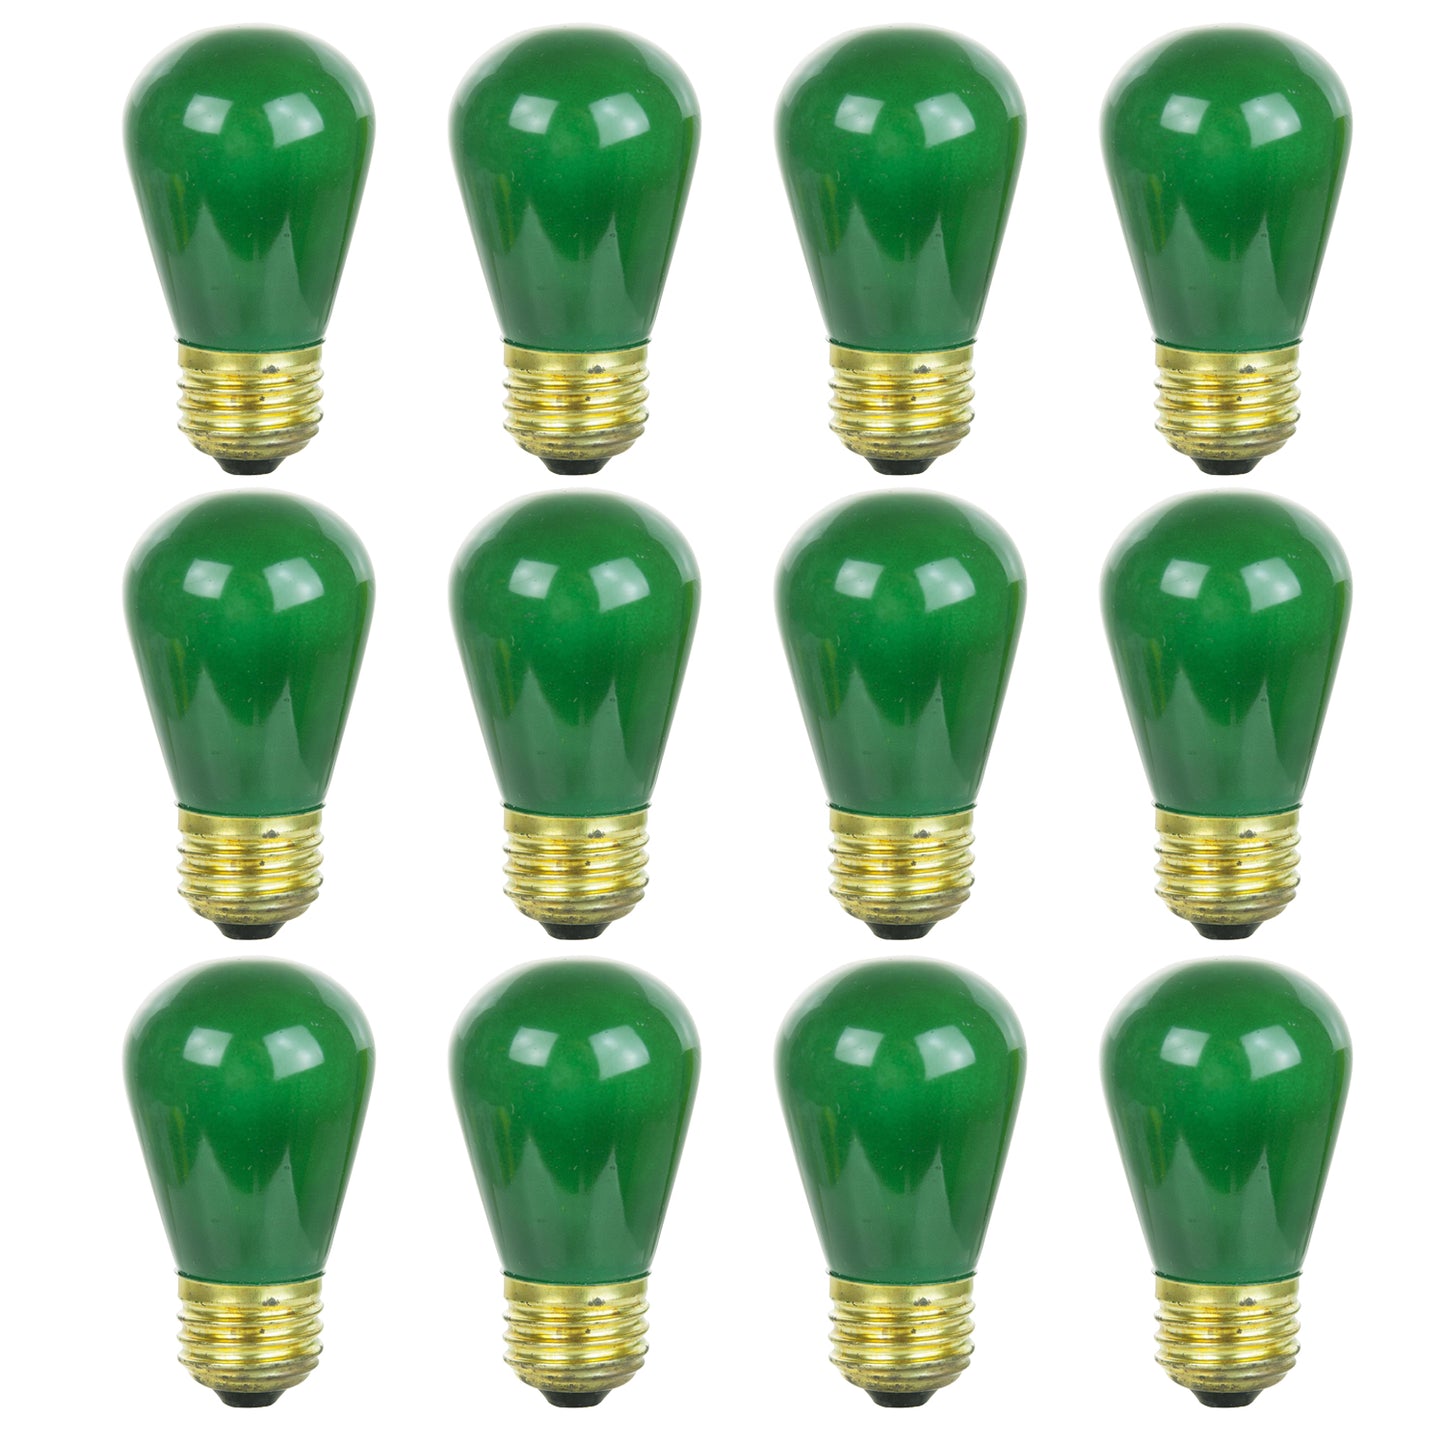 Sunlite 41478-SU S14 Incandescent Colored Party String Light Bulb, 11 Watts, Medium Base (E26), Dimmable, Mercury Free, Green 12 Pack